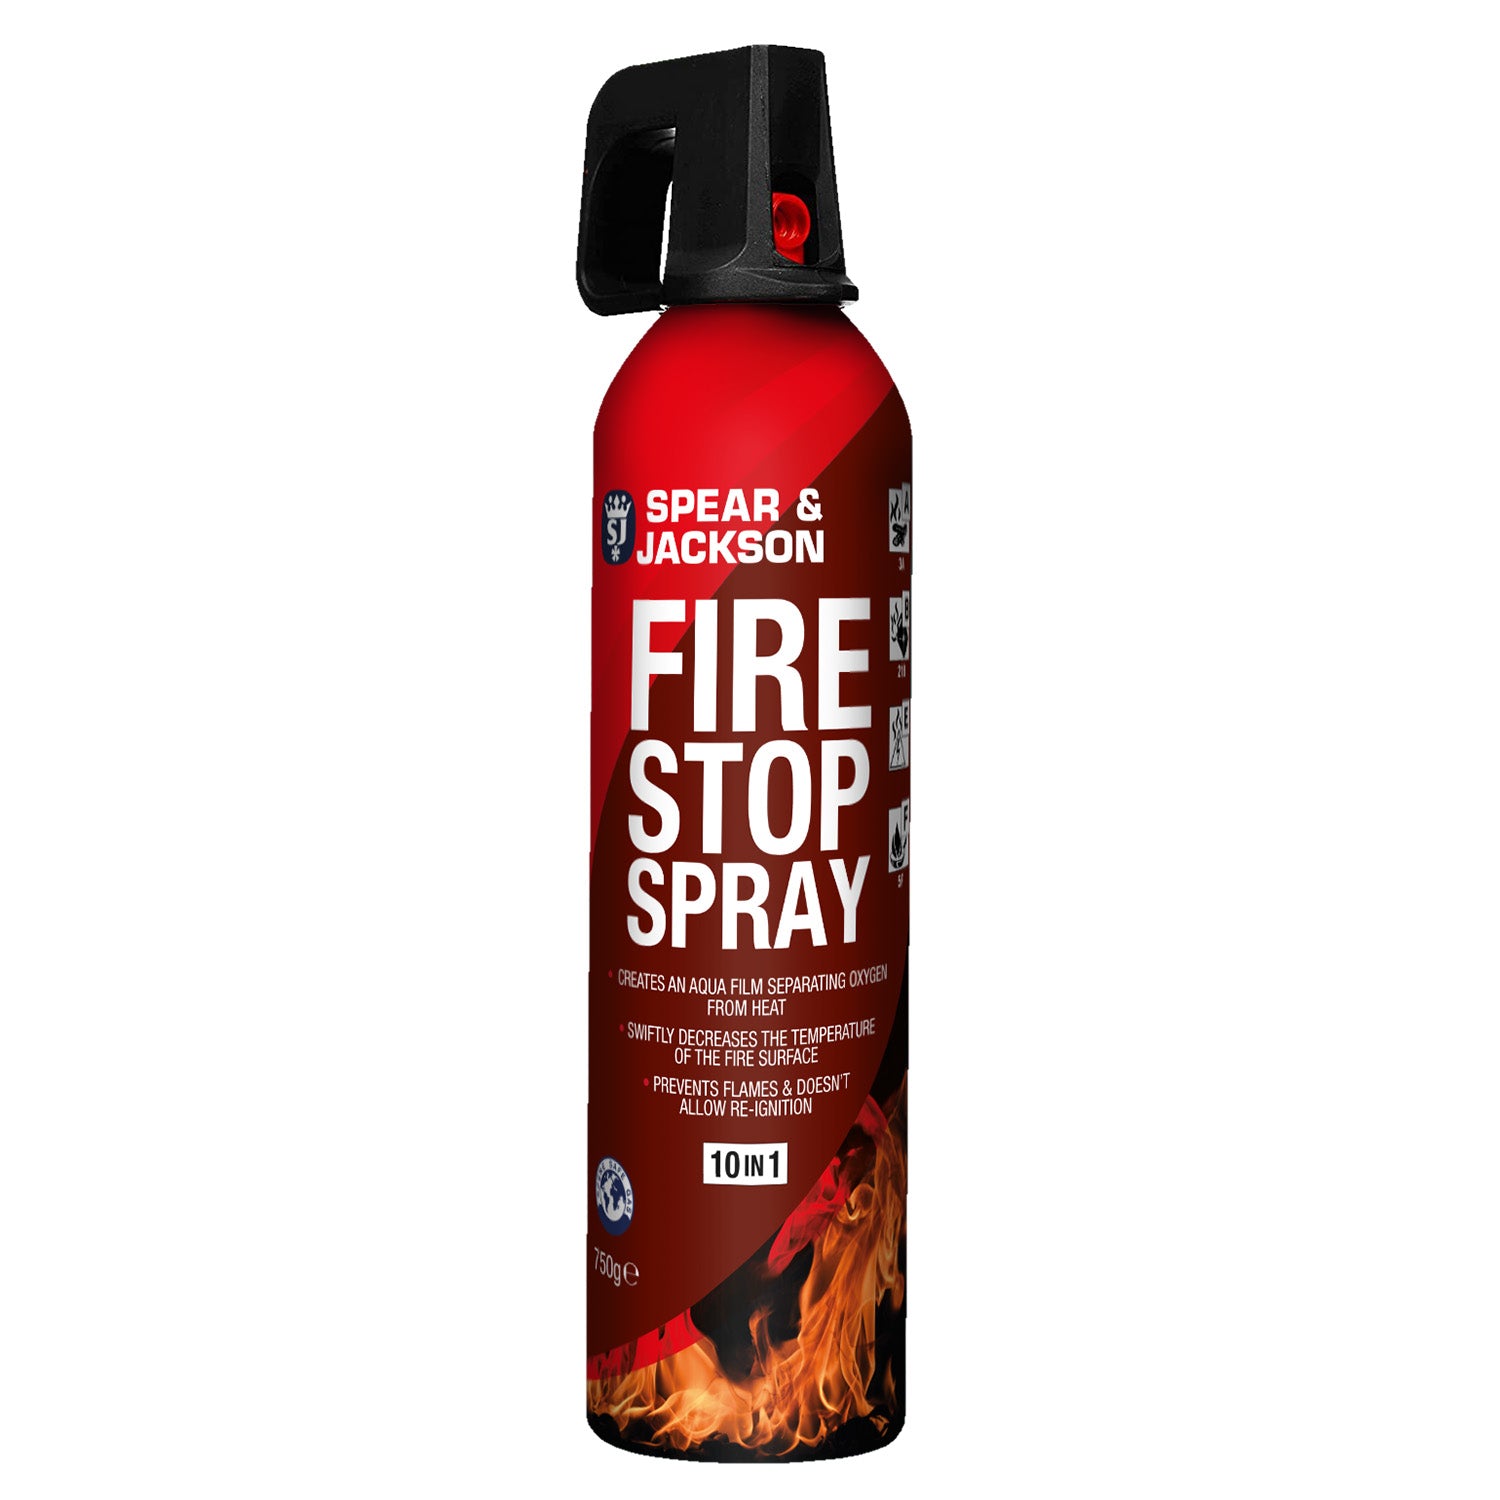 Fire Stop Spray 750g Spear and Jackson